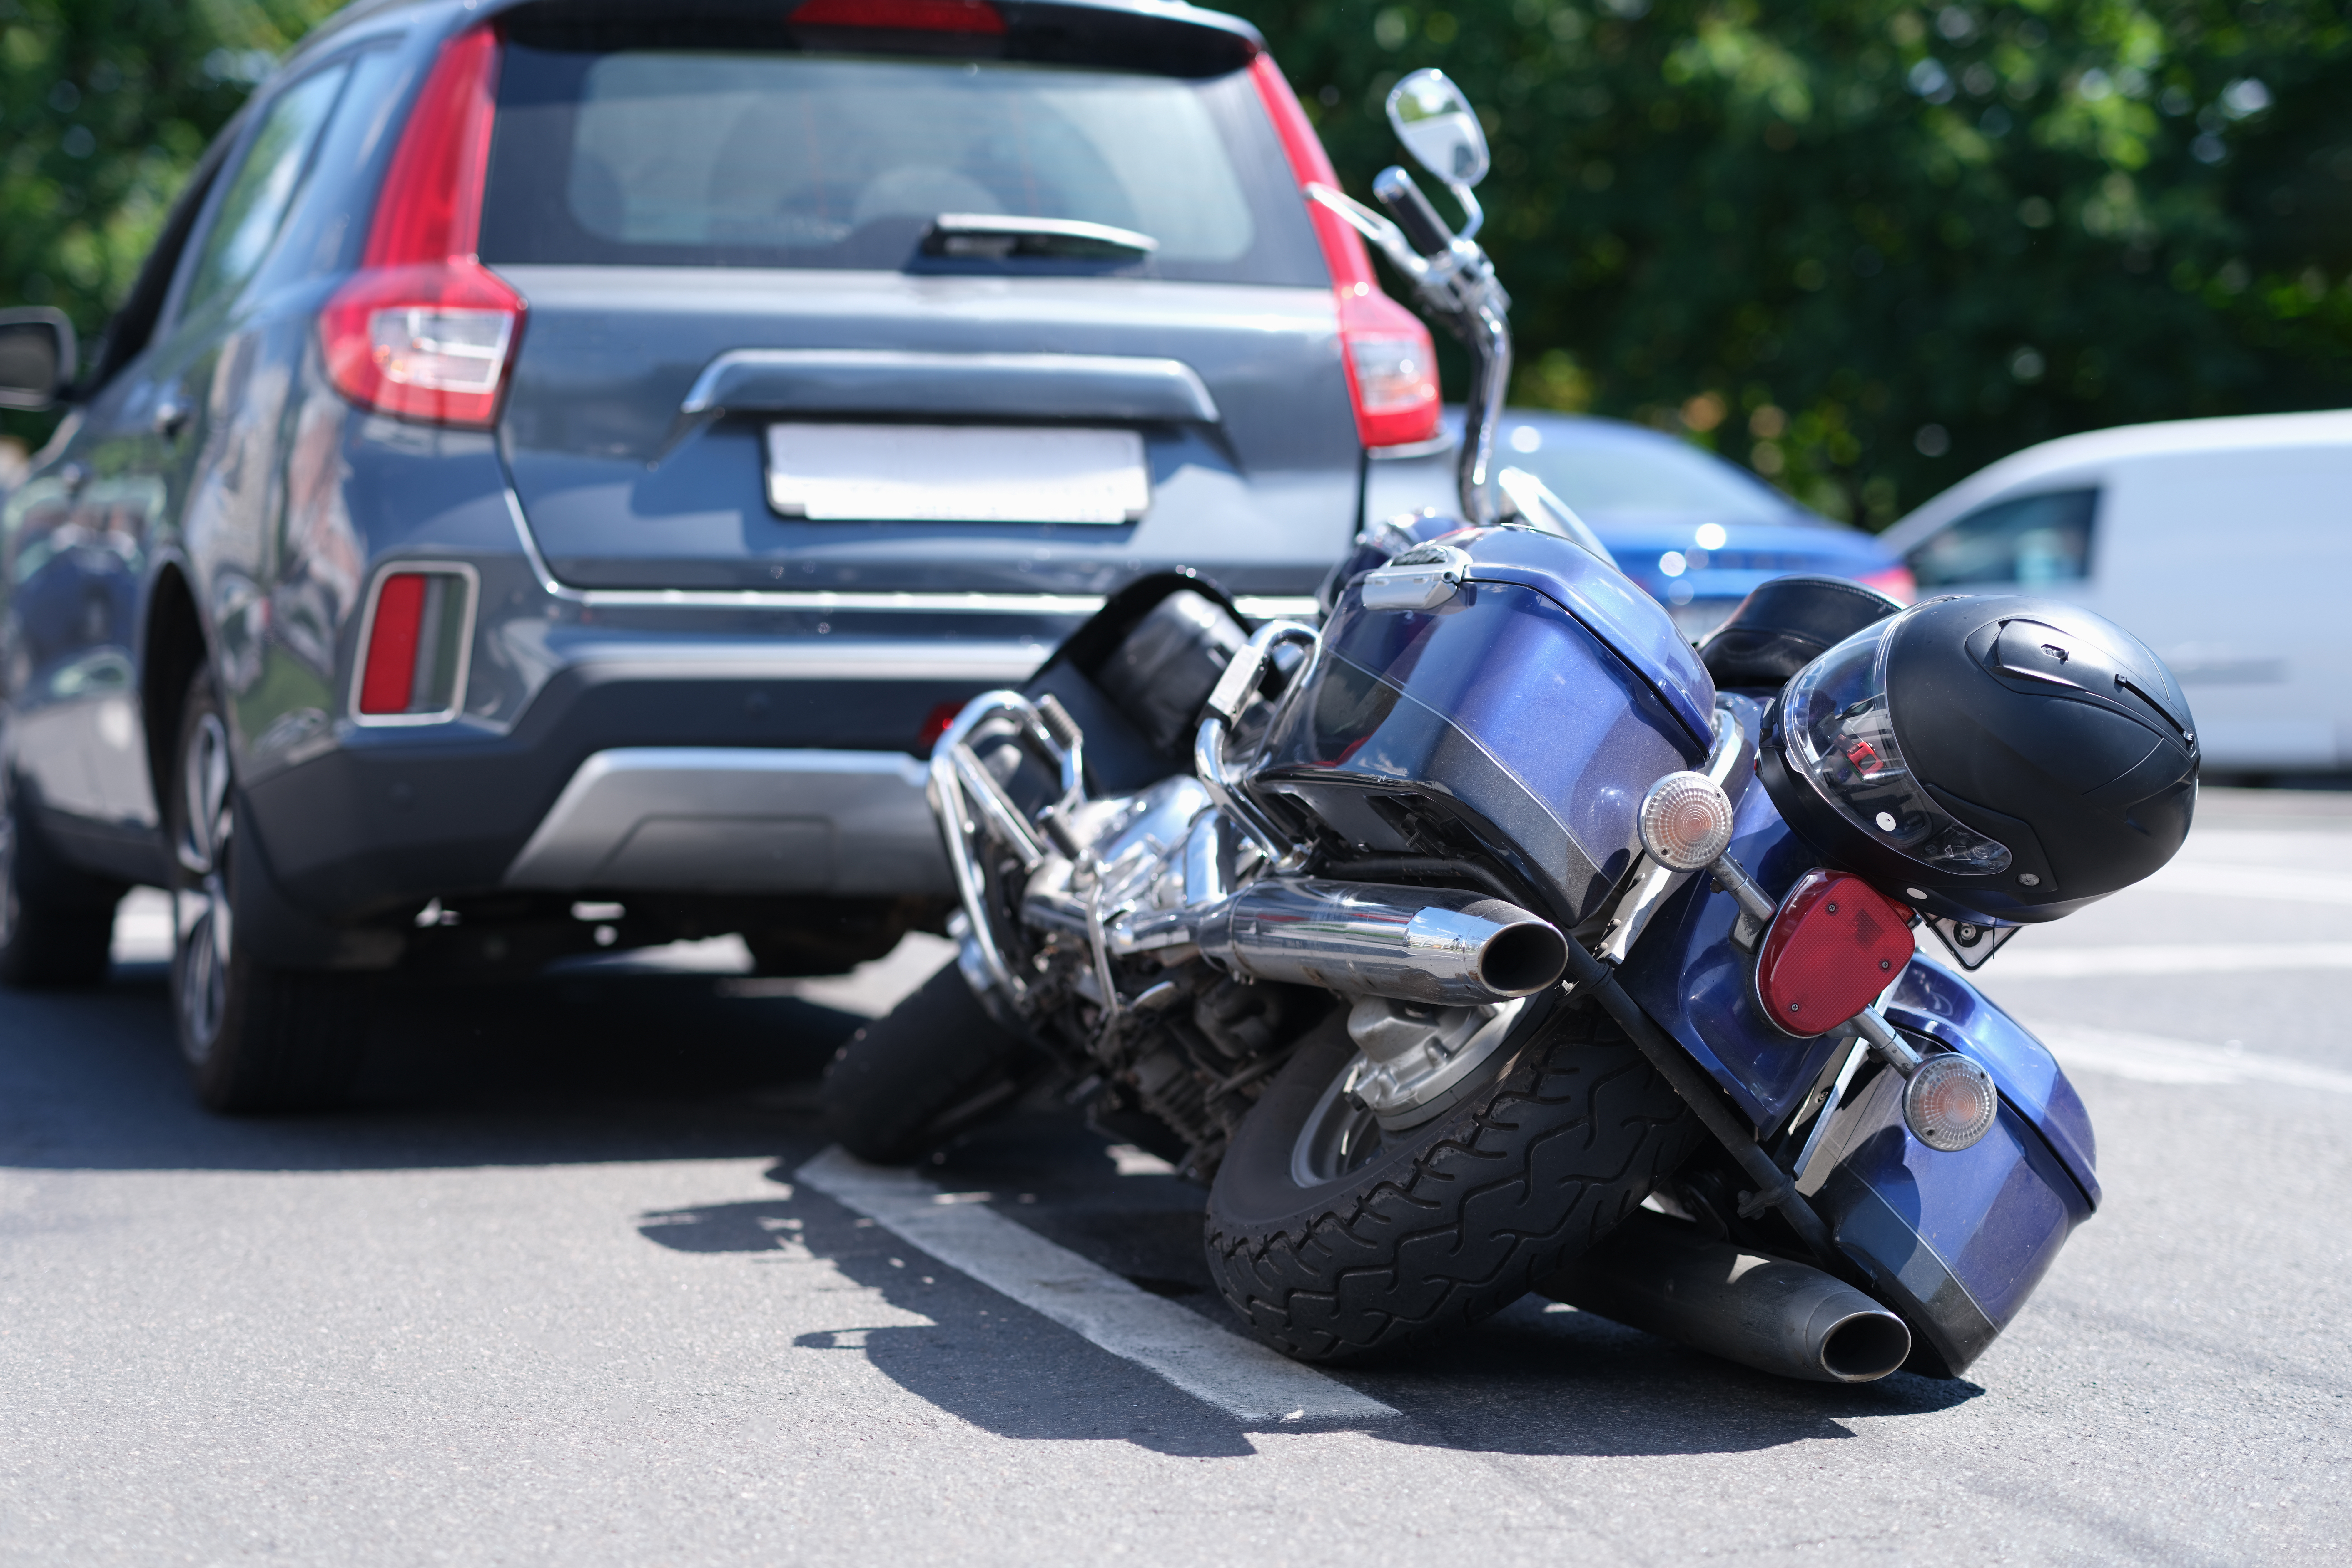 Things You Should Never Do After A Bike Accident